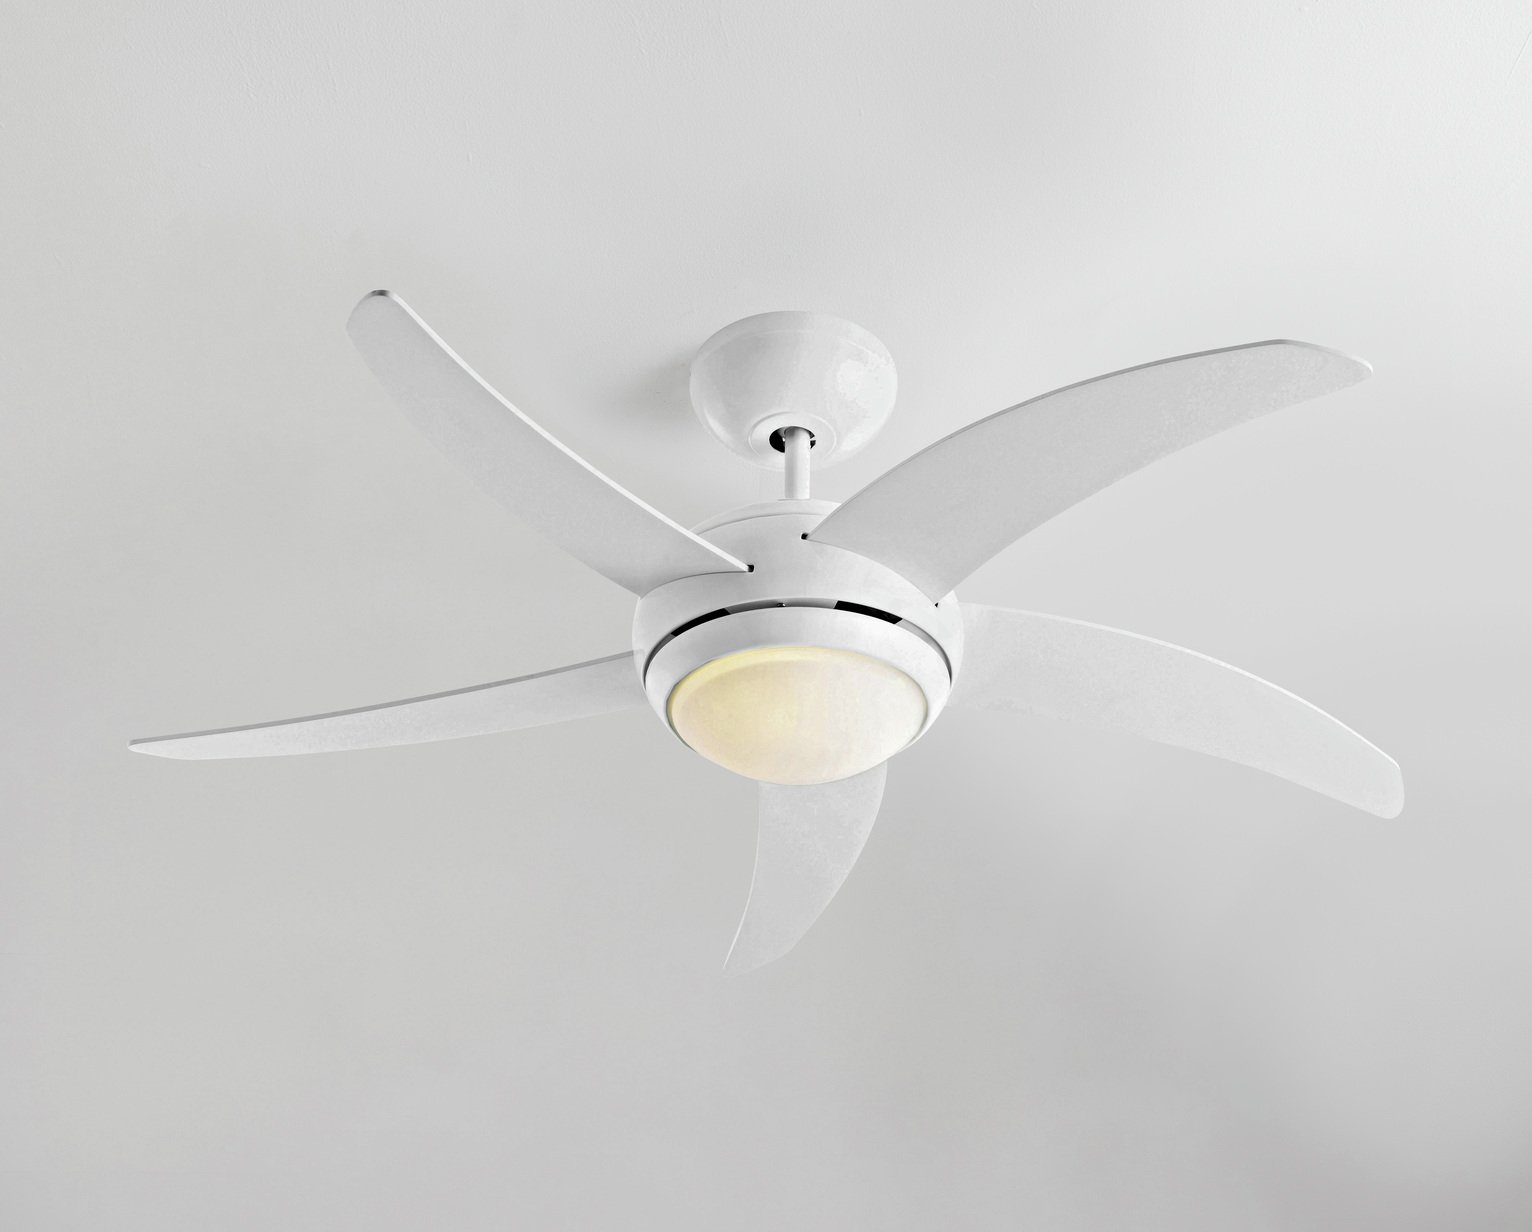 Manhattan Ceiling Fan White Cool Whilst Making Minimal Noise And